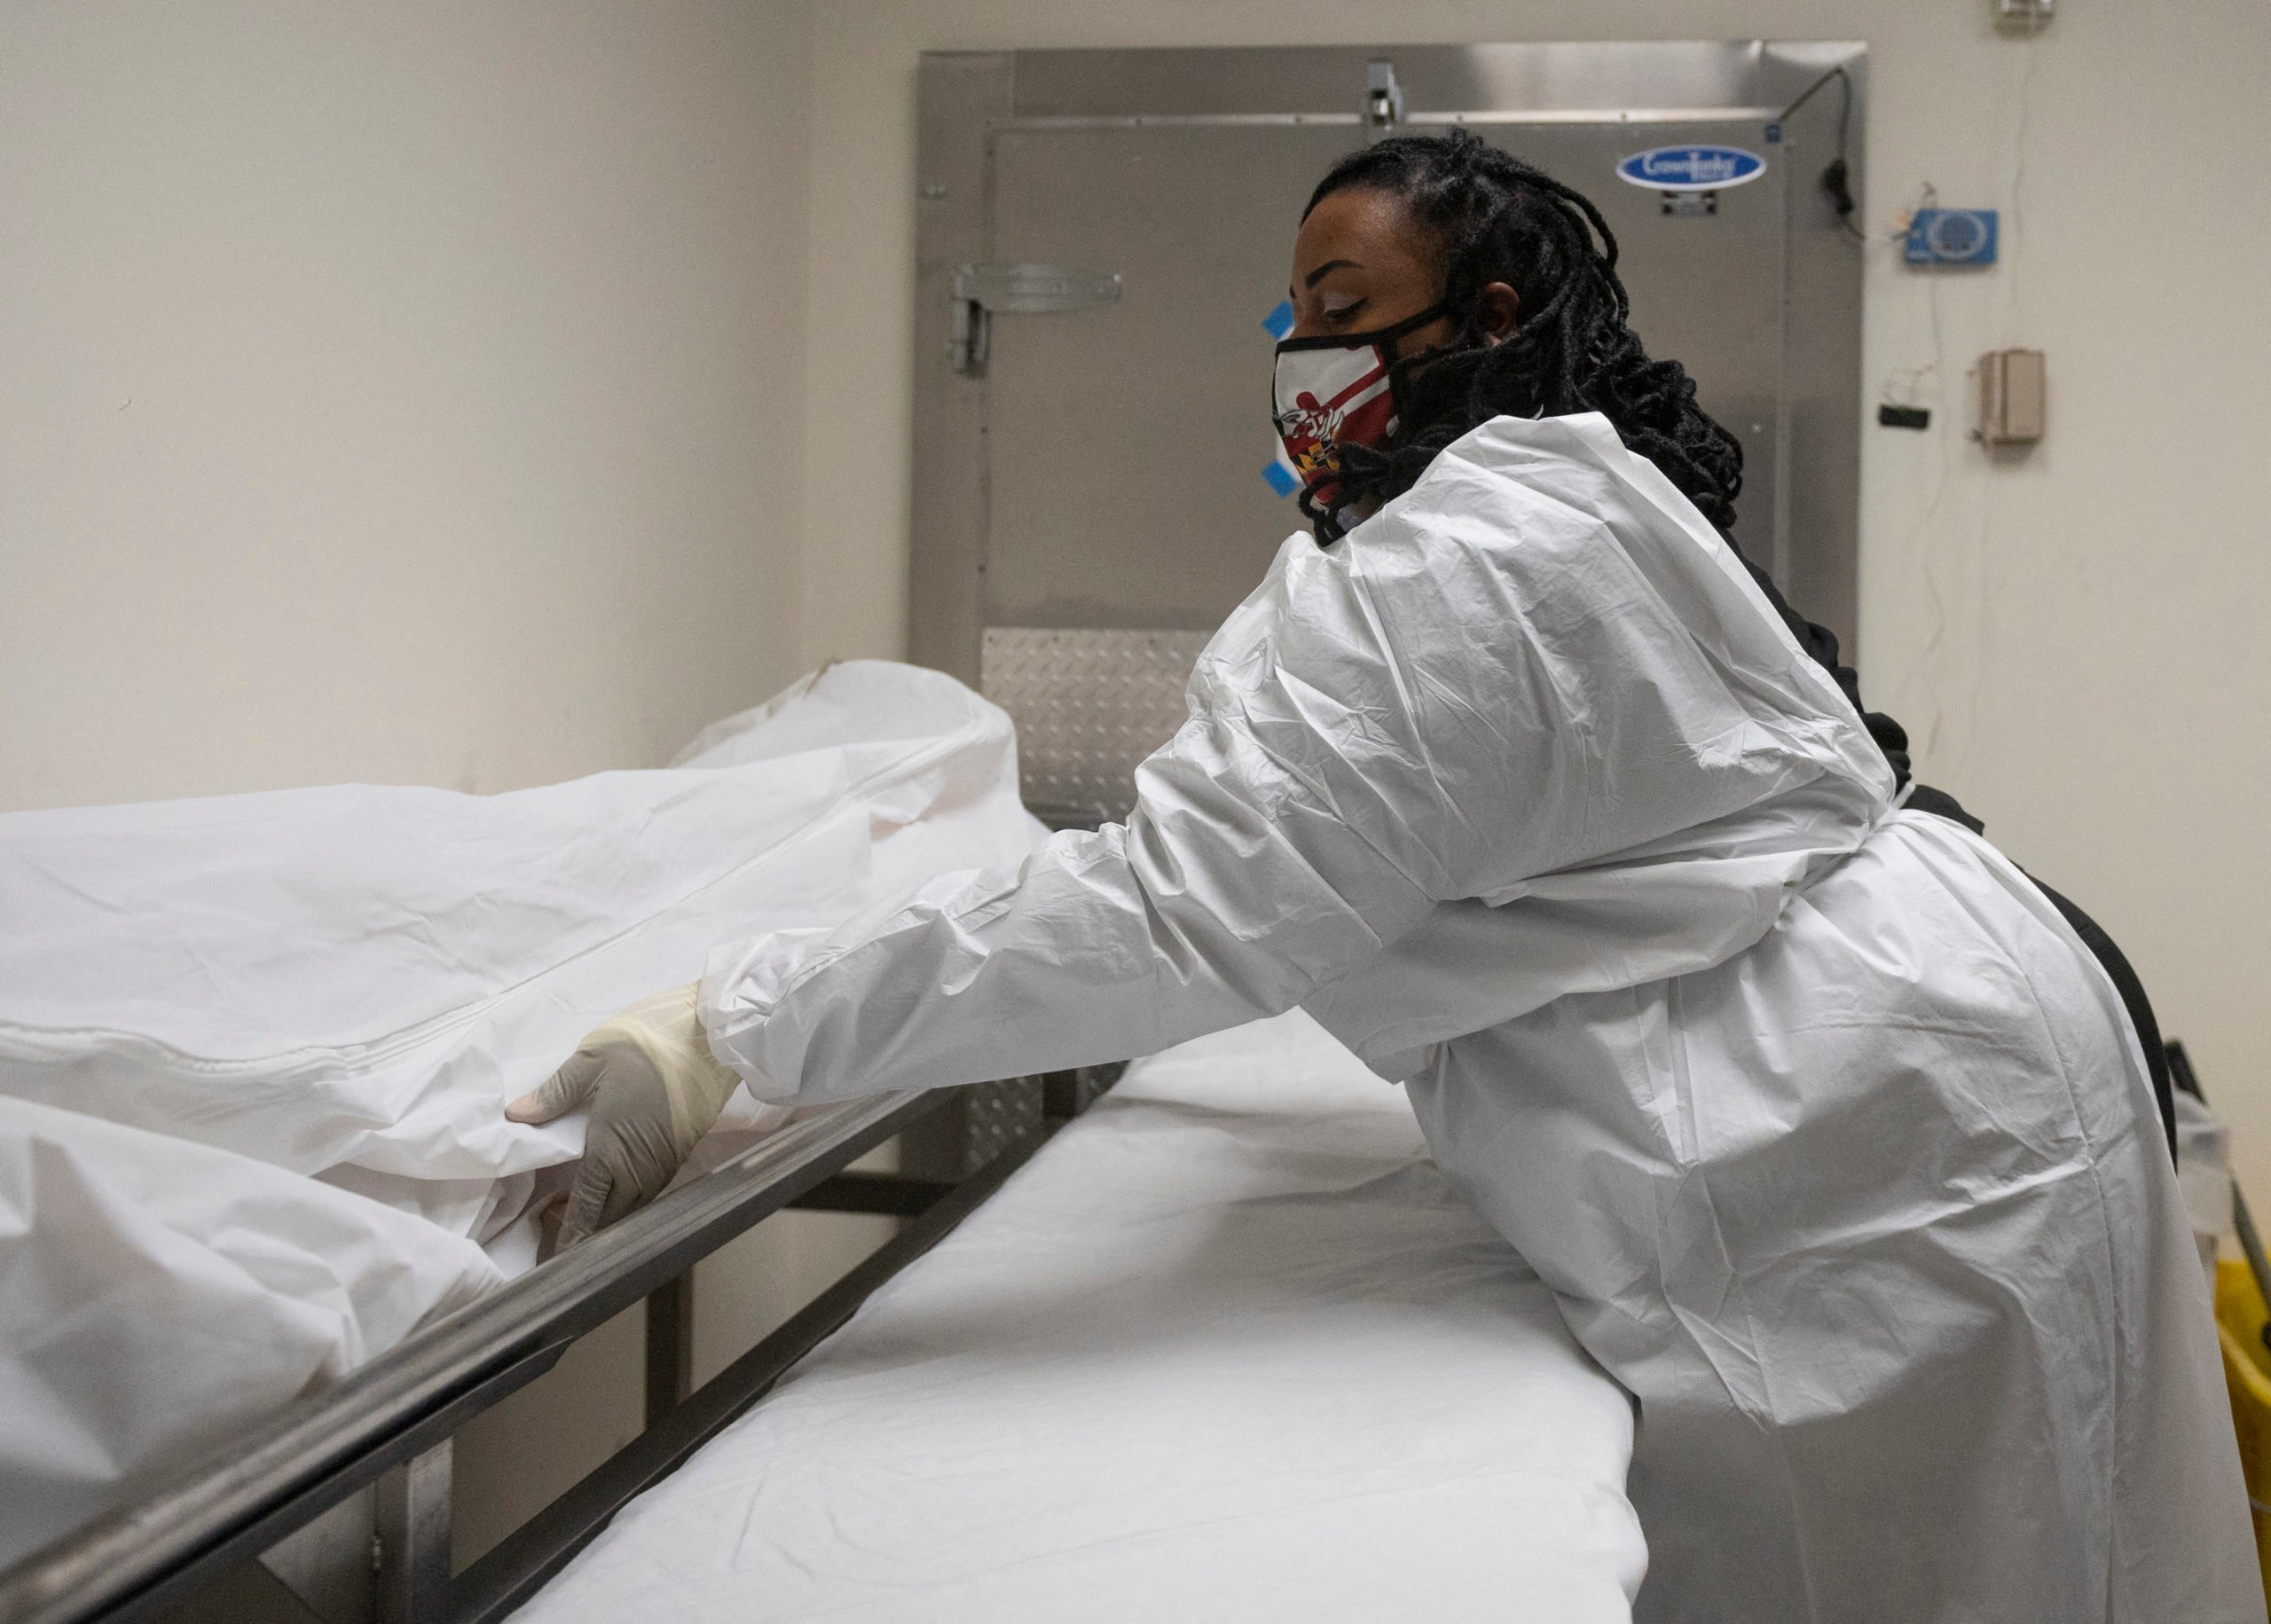 Funeral home transporter Morgan Dean-McMillan prepares to transport a suspected Covid-19 positive body in a hospital's morgue in Baltimore, Maryland on December 23, 2020 during the Covid-19 pandemic. The United States surpassed 18 million reported Covid-19 cases on Monday, figures from Johns Hopkins University showed, as the virus surges nationwide. When it comes to vaccination priority, long-term care residents and health workers are at the front of the line. Maryland crematorium owner Dorota Marshall hopes that her workers going to do pickups and regularly entering hospitals, hospices, nursing homes and residences, get the vaccine in the next round. Marshall says "We visit homes where people recently died from Covid or family members are positive, so absolutely I think we are front line workers." (Photo by ANDREW CABALLERO-REYNOLDS/AFP via Getty Images)